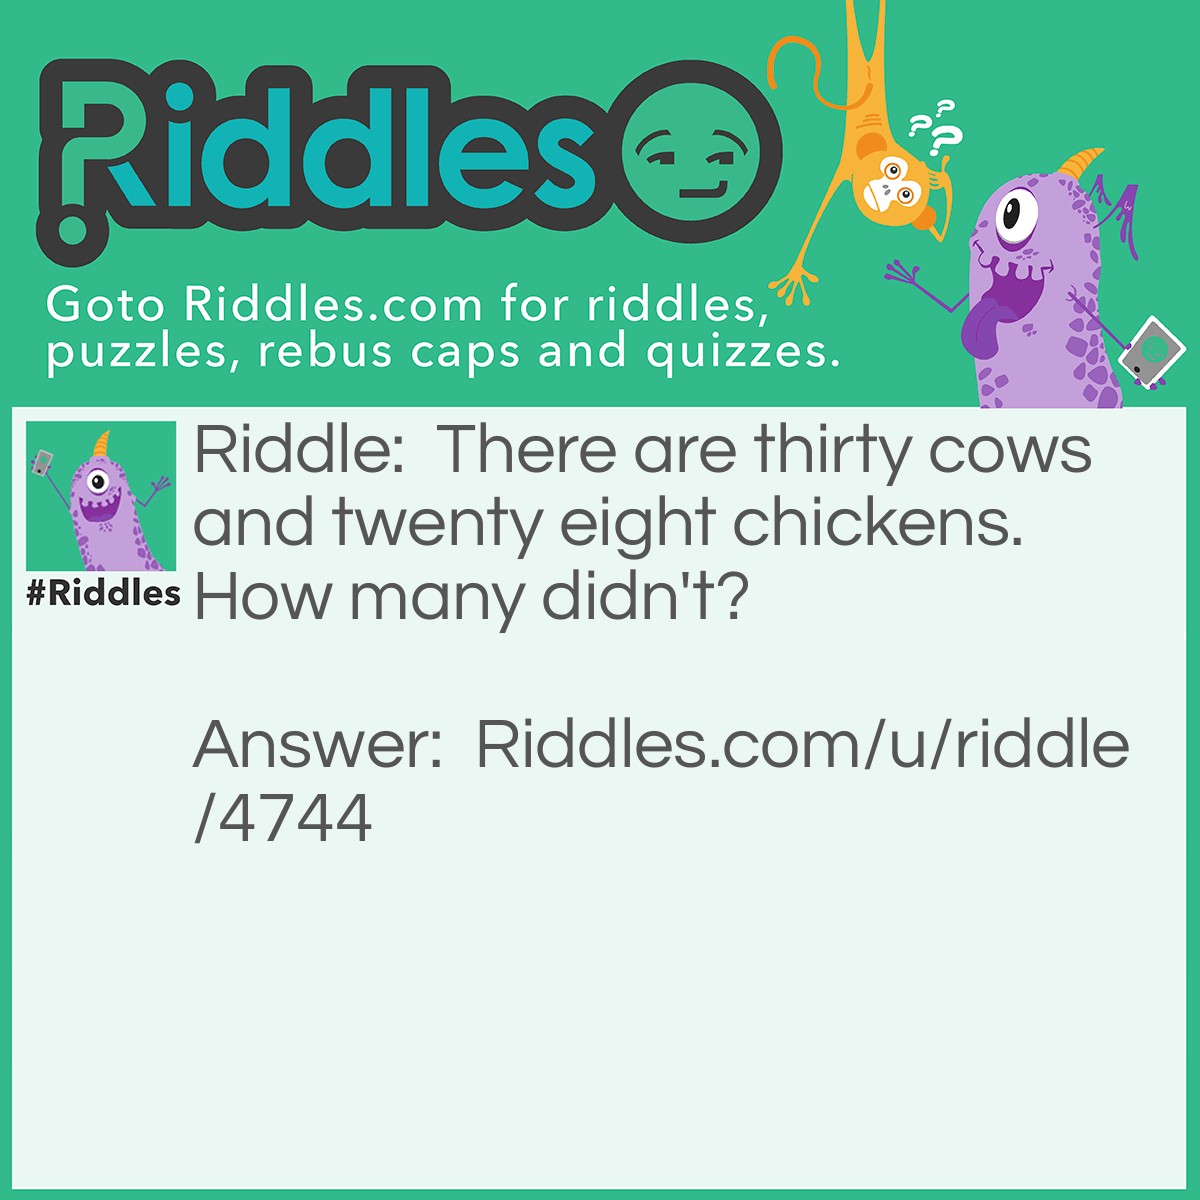 Riddle: There are thirty cows and twenty eight chickens. How many didn't? Answer: 10.